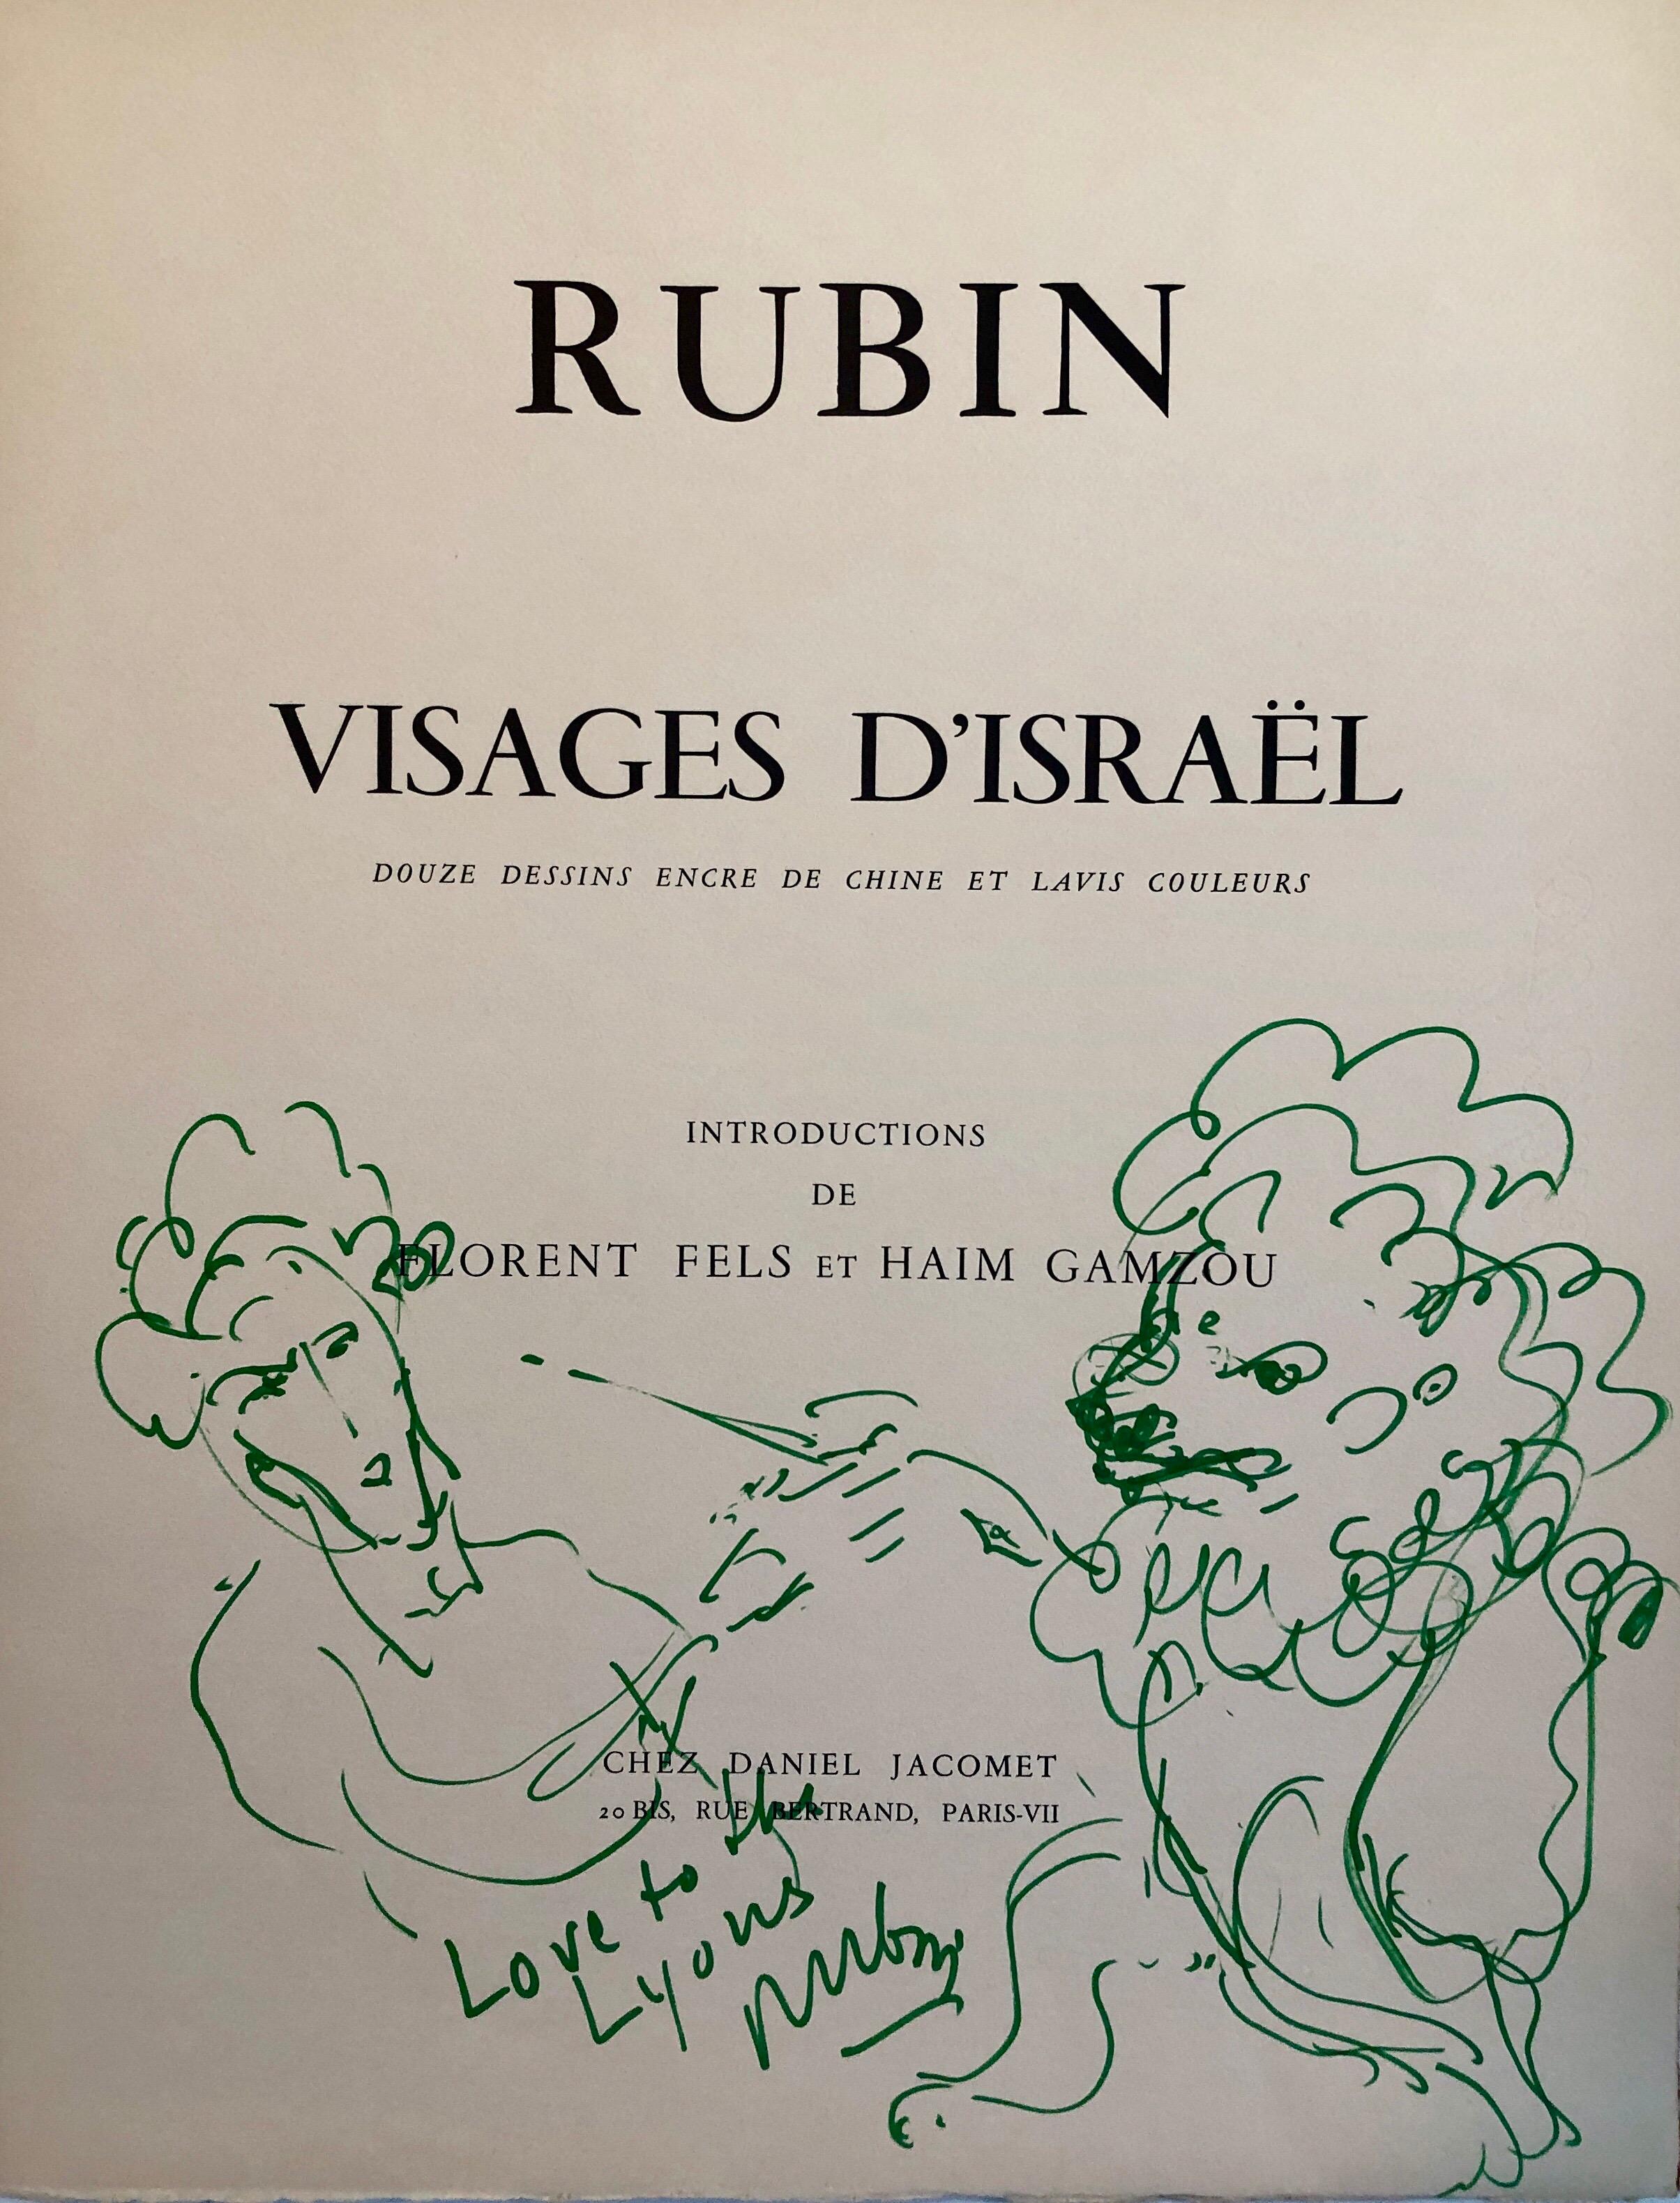 Original drawing on Lithograph cover sheet printed by Chez Daniel Jacomet, Paris, France 1960 on on Arches deckle edged paper. hand signed with inscription.


Reuven Rubin 1893 -1974 was a Romanian-born Israeli painter and Israel's first ambassador